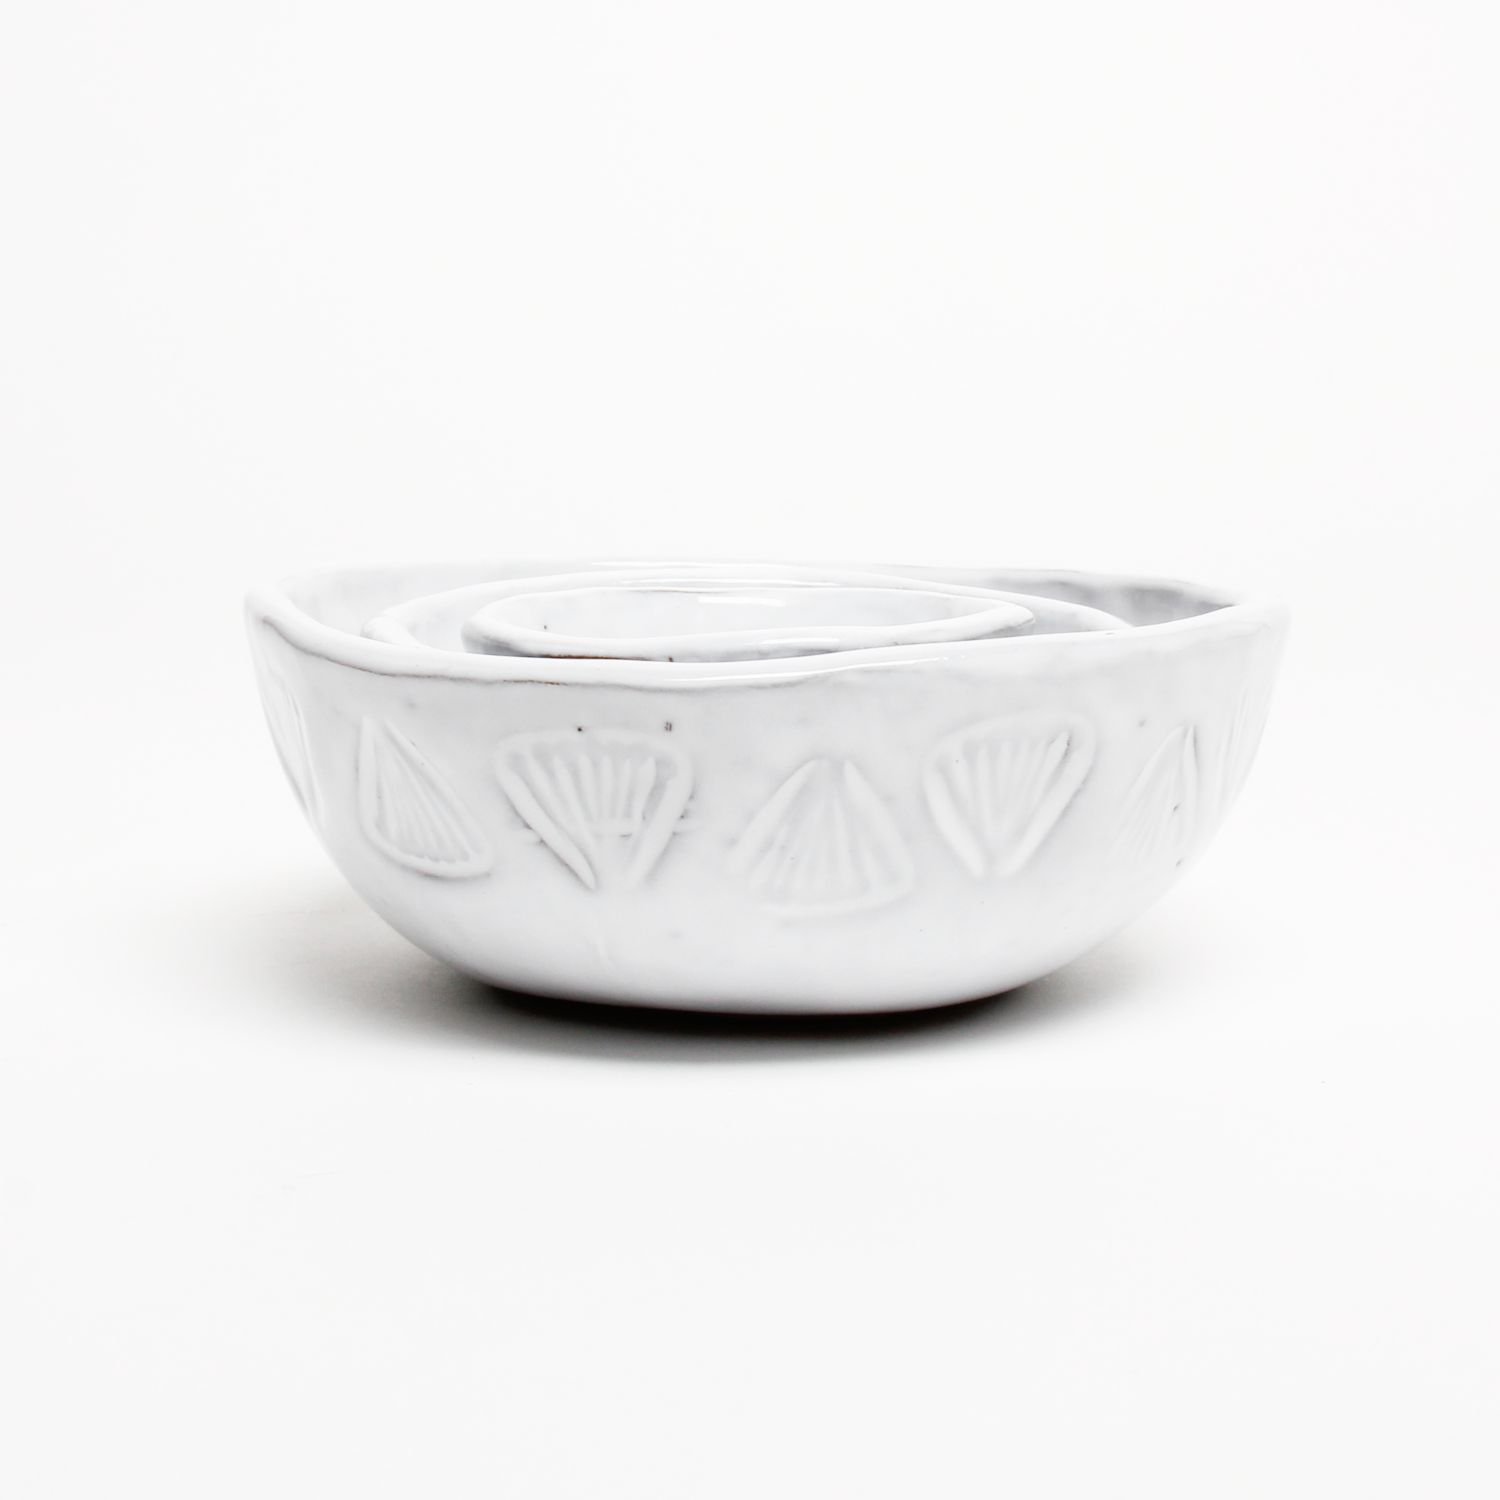 Jacquie Blondin: Nesting Bowl with Carved X Design (Set of 3) Product Image 4 of 4